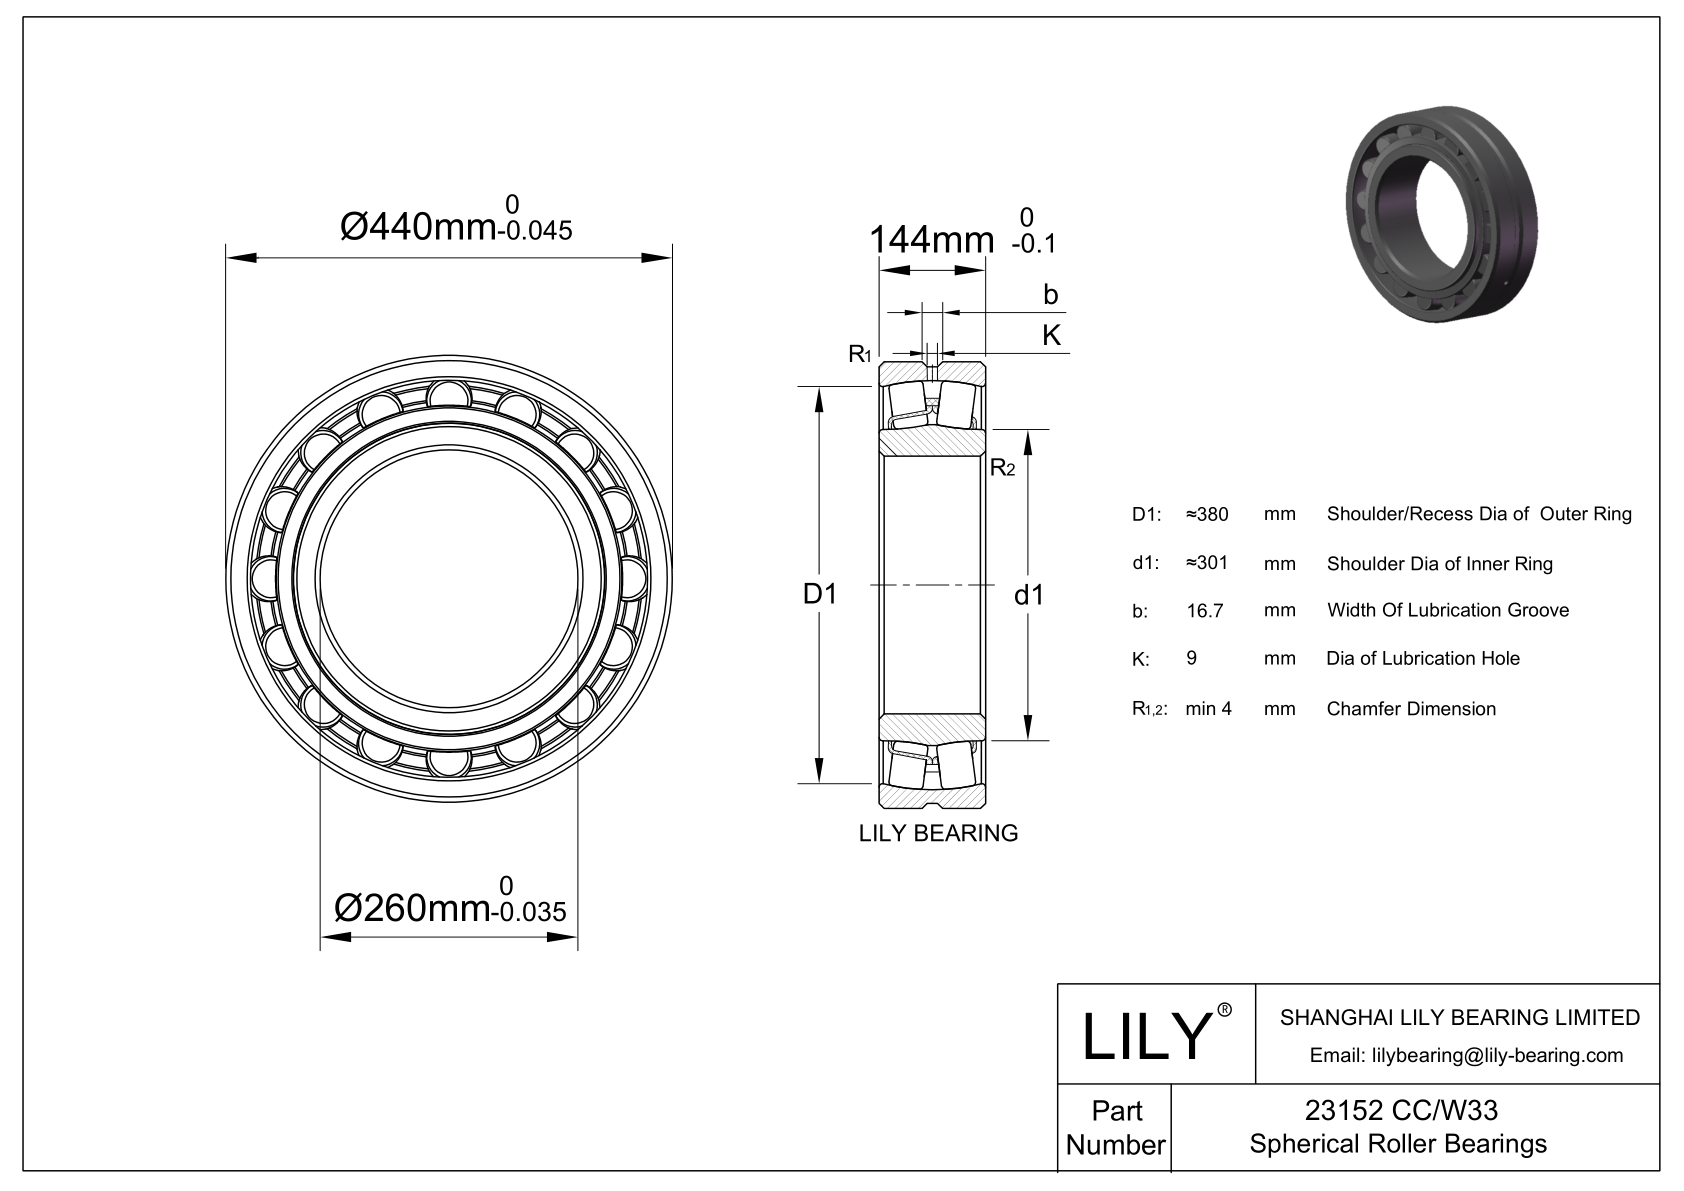 23152 CC/W33 Double Row Spherical Roller Bearing cad drawing